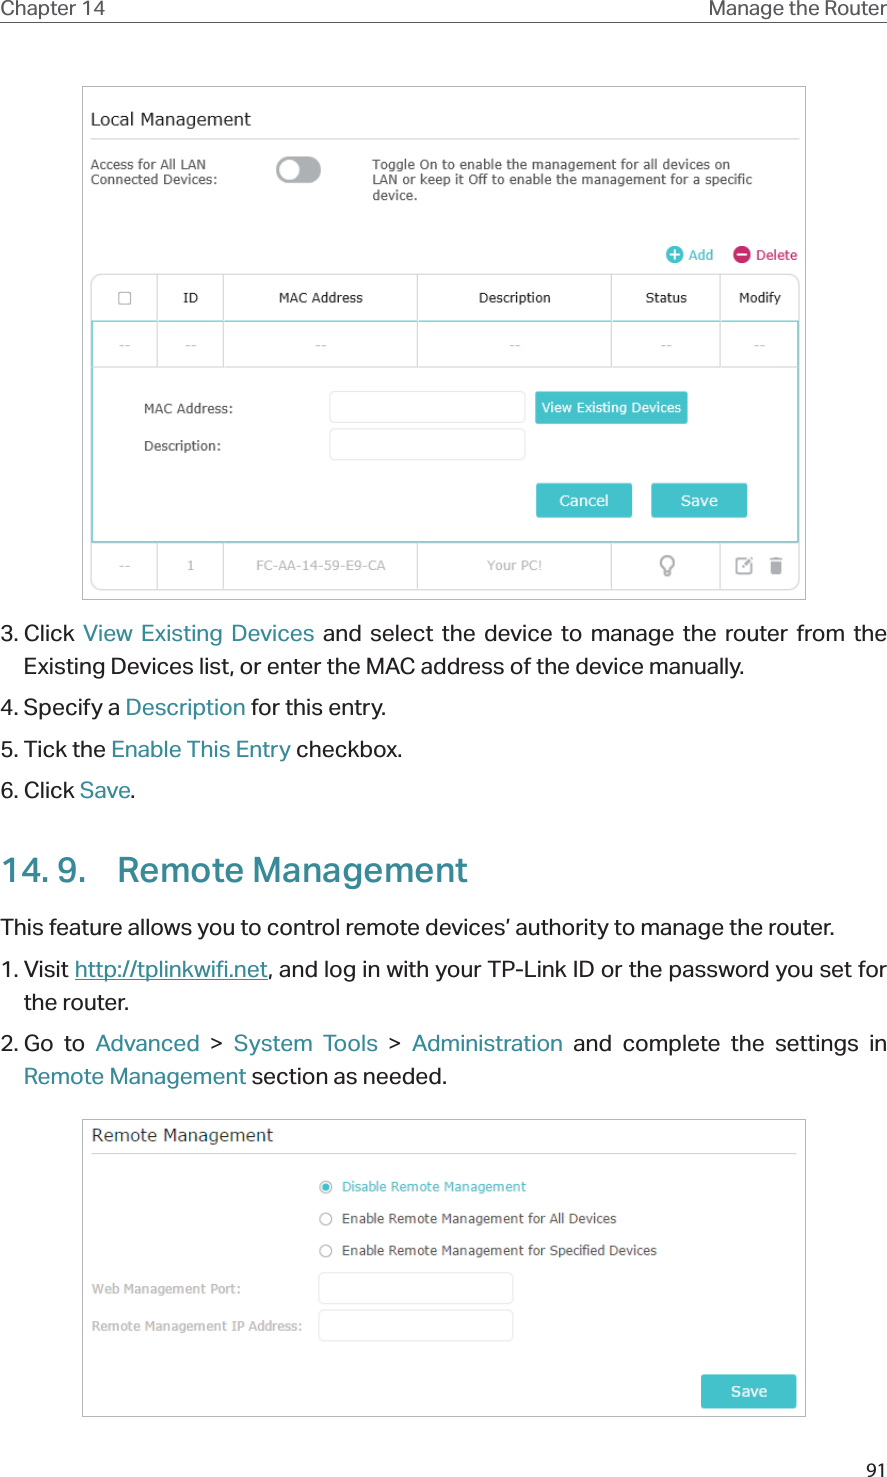 91Chapter 14 Manage the Router 3. Click  View Existing Devices and select the device to manage the router from the Existing Devices list, or enter the MAC address of the device manually.4. Specify a Description for this entry.5. Tick the Enable This Entry checkbox.6. Click Save.14. 9.  Remote ManagementThis feature allows you to control remote devices’ authority to manage the router.1. Visit http://tplinkwifi.net, and log in with your TP-Link ID or the password you set for the router.2. Go  to  Advanced &gt; System Tools &gt;  Administration and complete the settings in Remote Management section as needed.